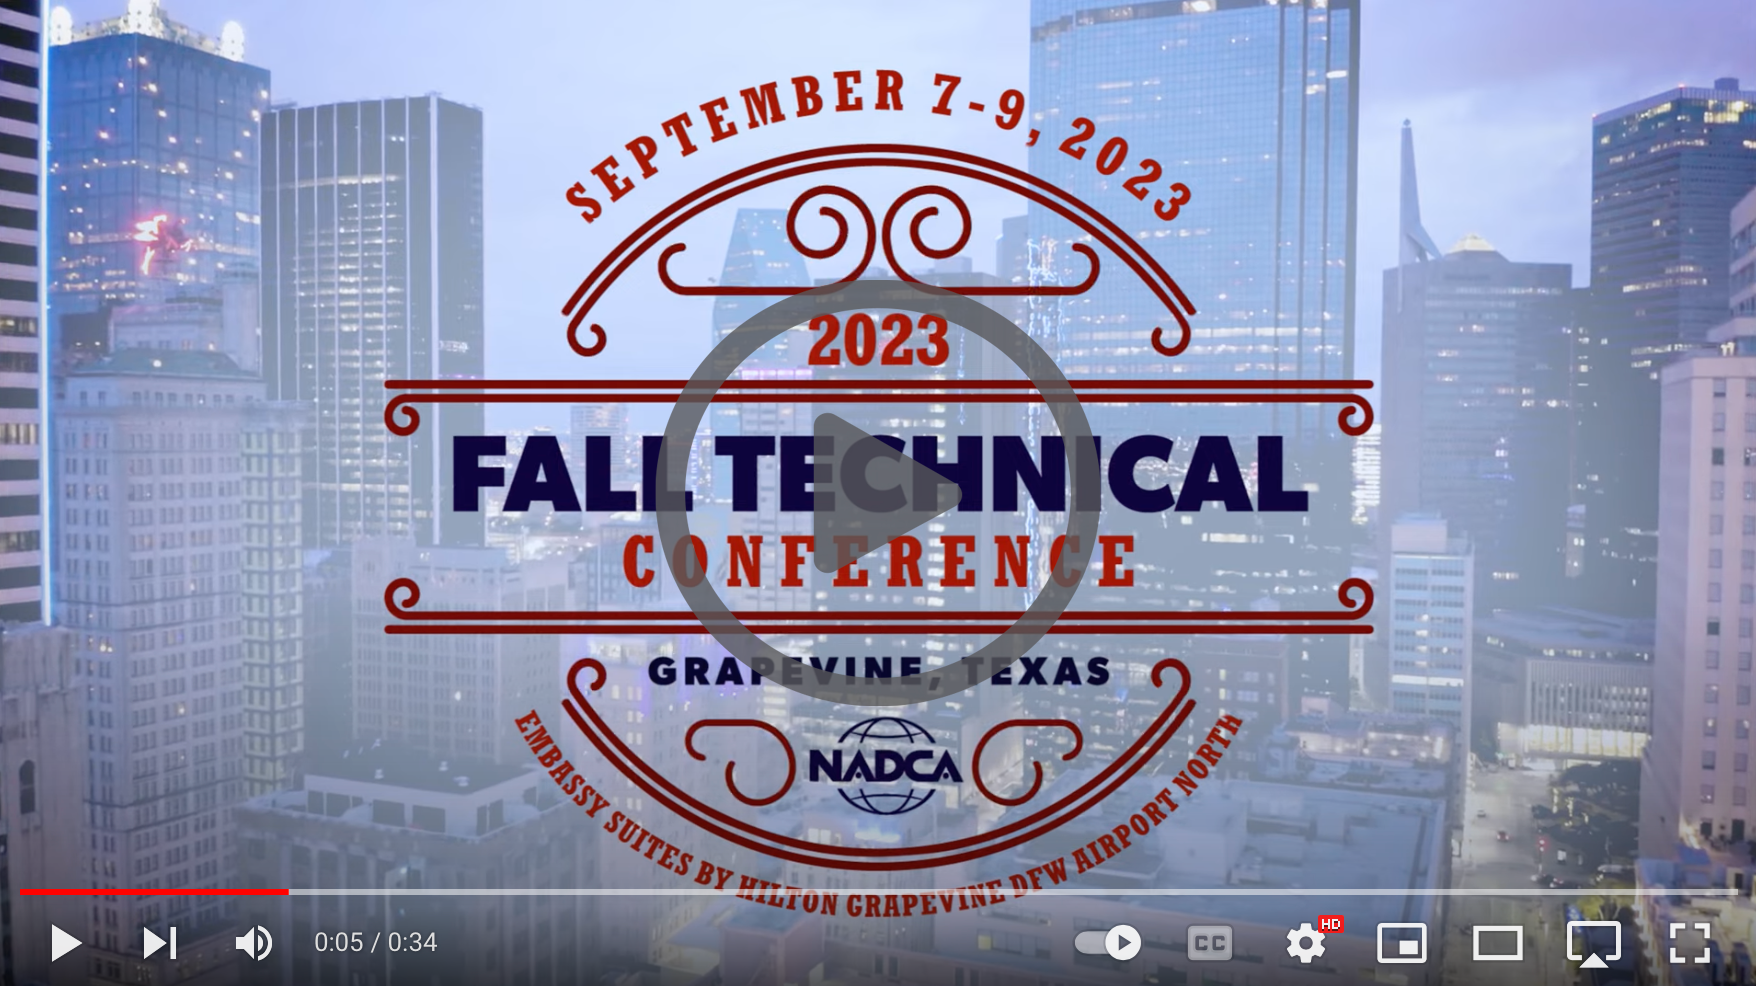 NADCA is Heading to Texas for Our 2023 Fall Technical Conference